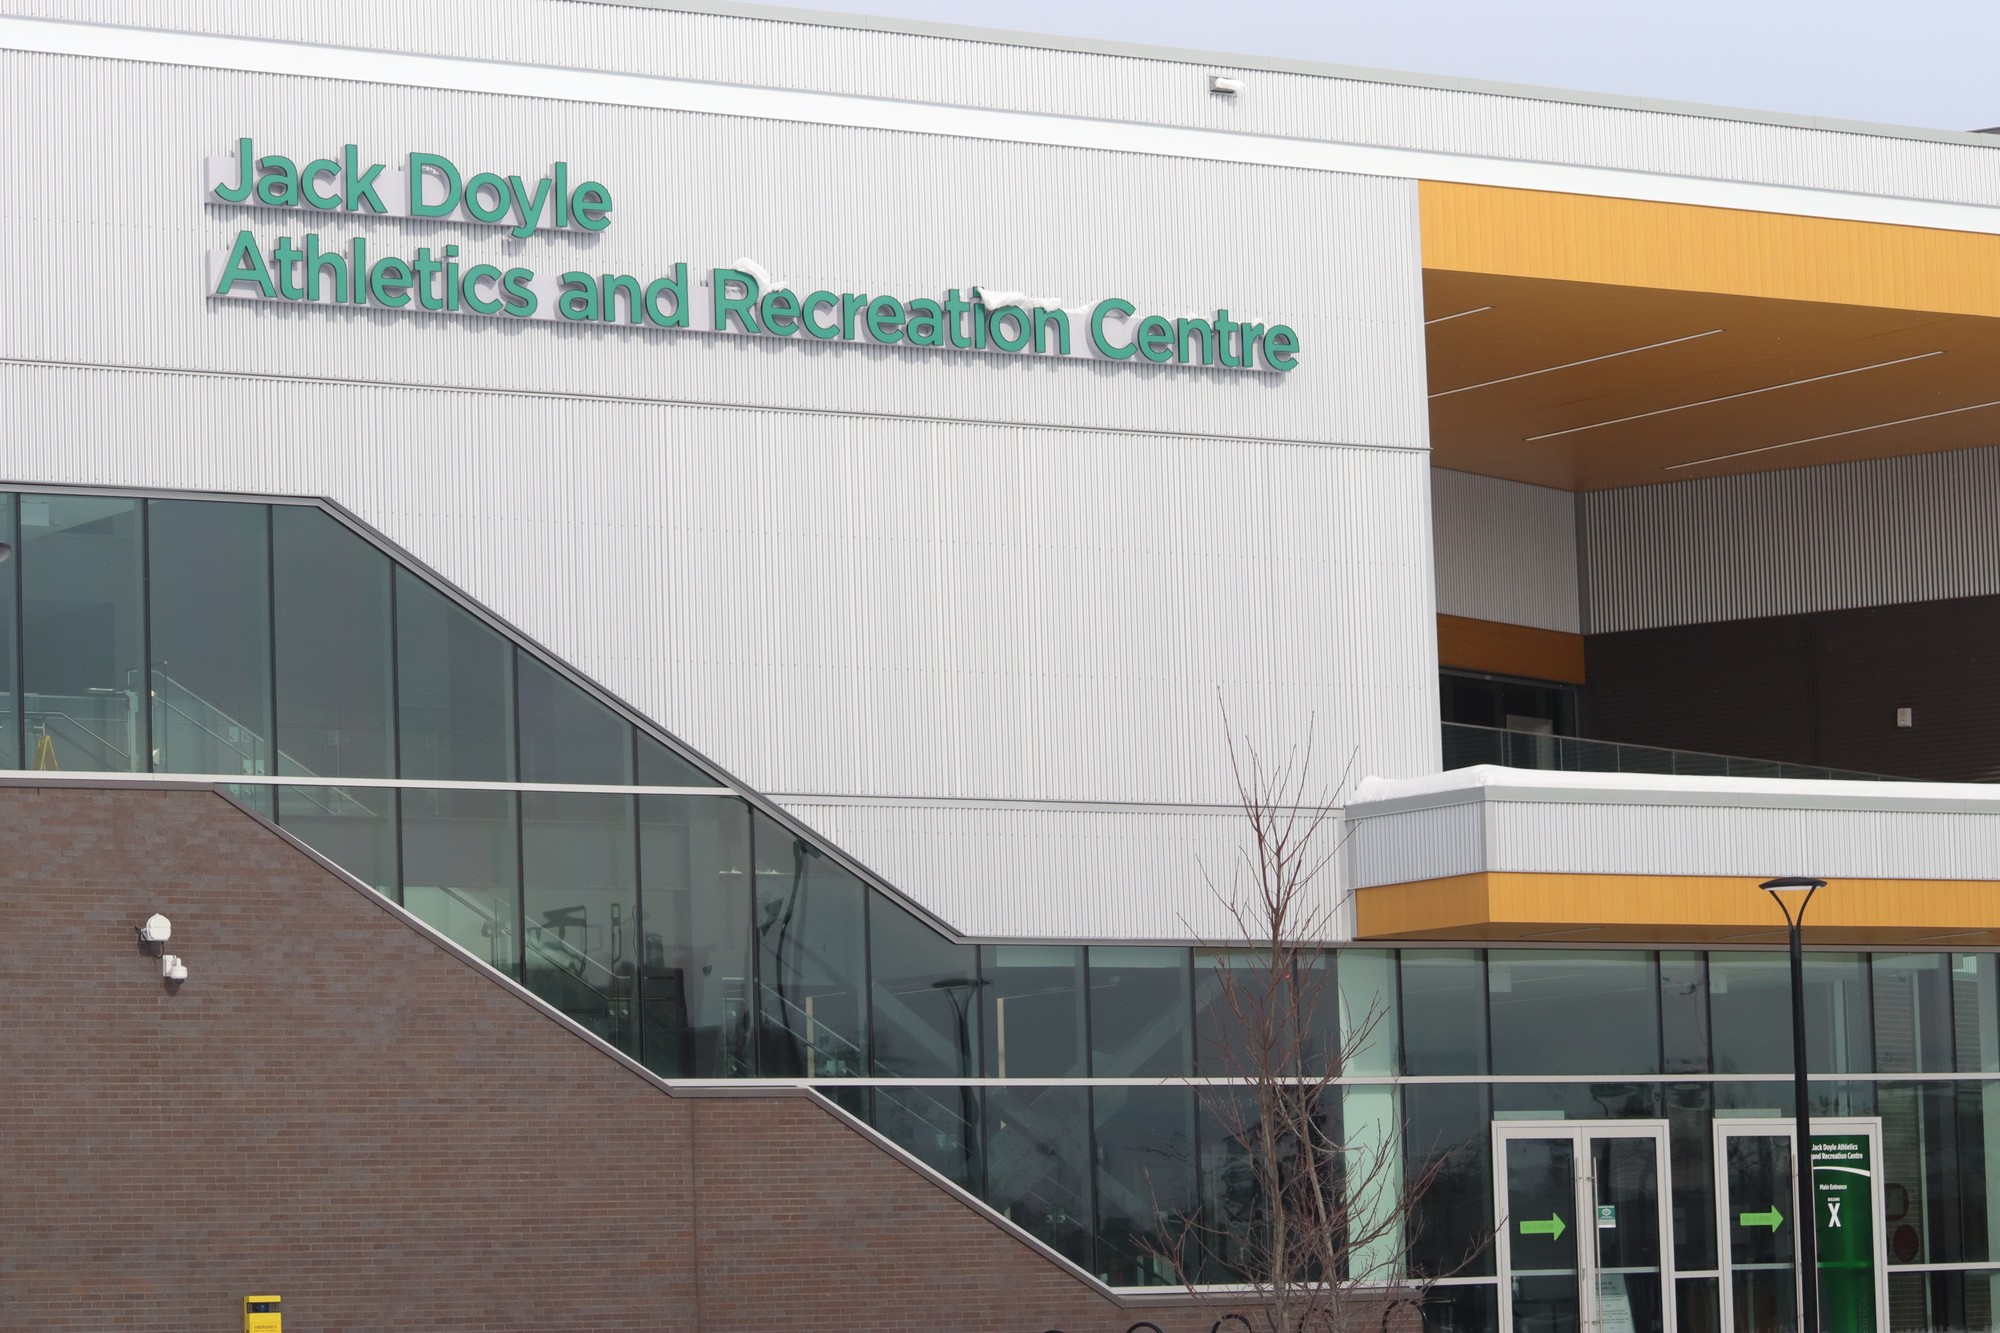 The Jack Doyle Athletics and Recreation Centre has been shut since Jan. 5 due to provincial COVID-19 mandates. It will reopen on Monday, Jan. 31 to vaccinated Algonquin College students and staff.